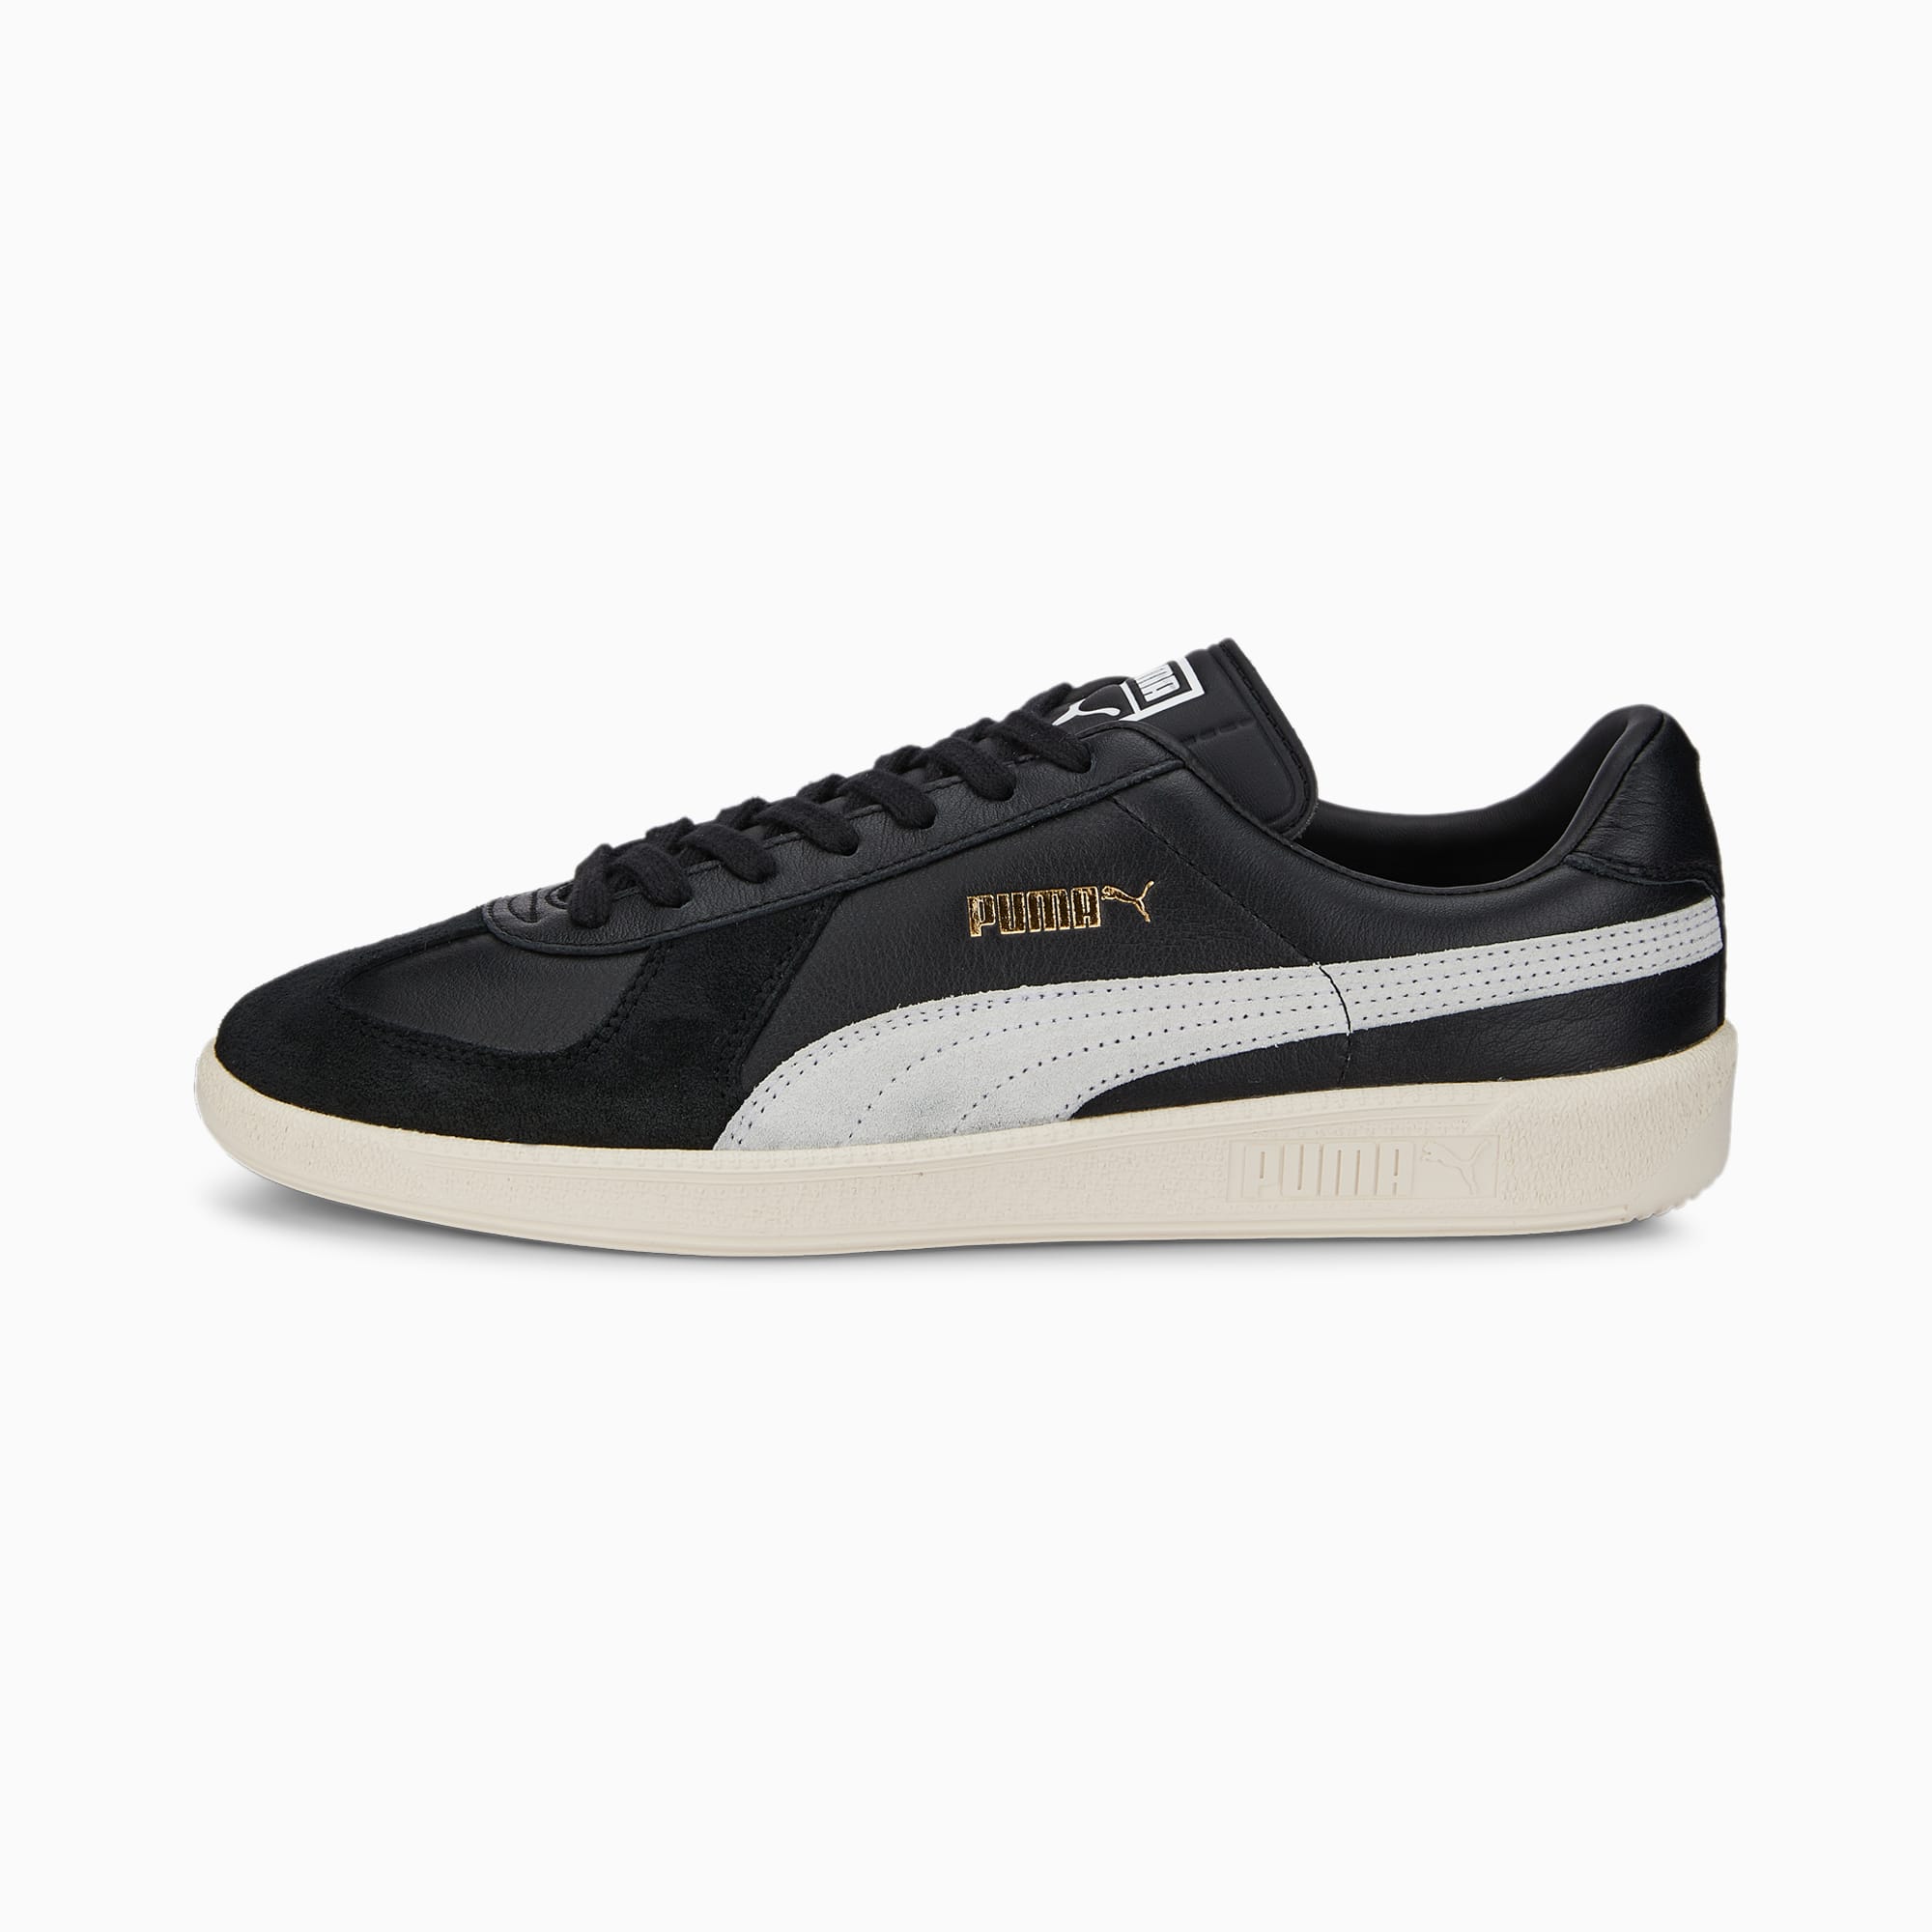 Women's PUMA Army Trainer Sneakers, Black/Pristine, Size 35,5, Shoes